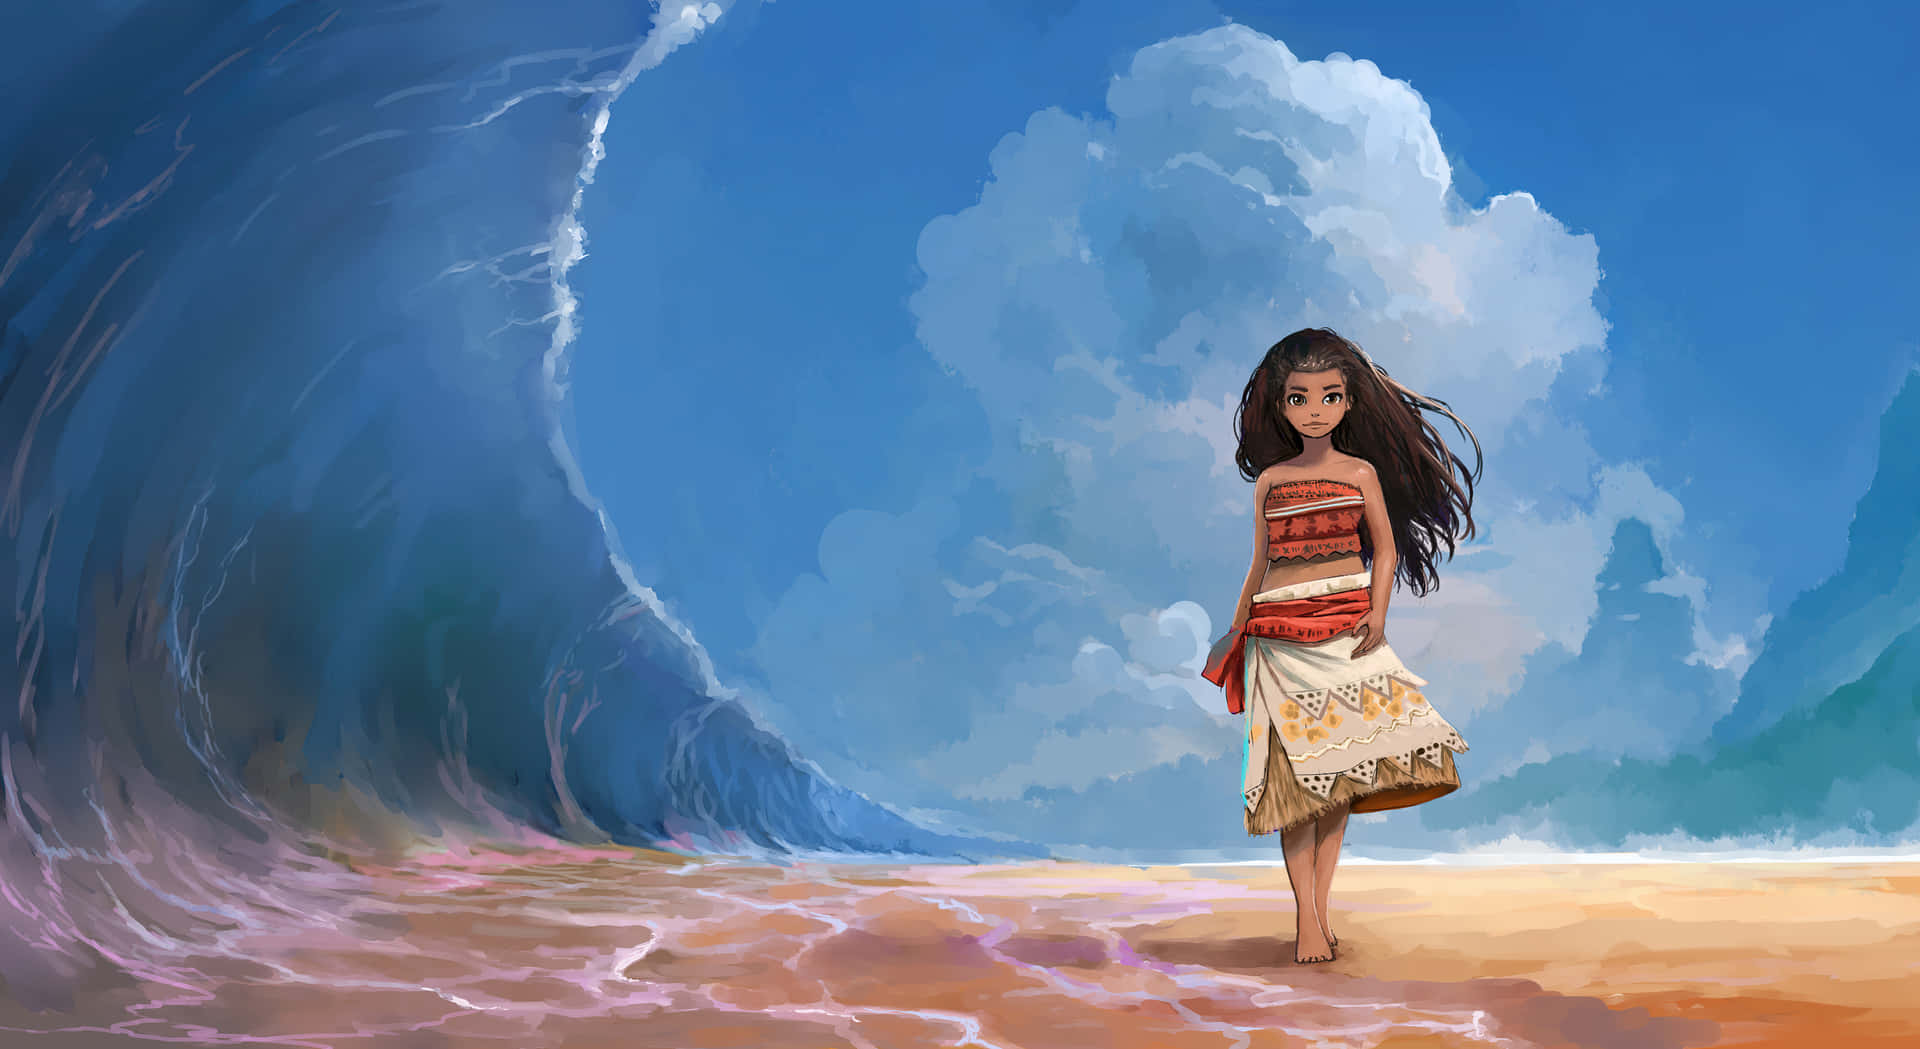 A Girl Is Walking On The Beach With A Wave Behind Her